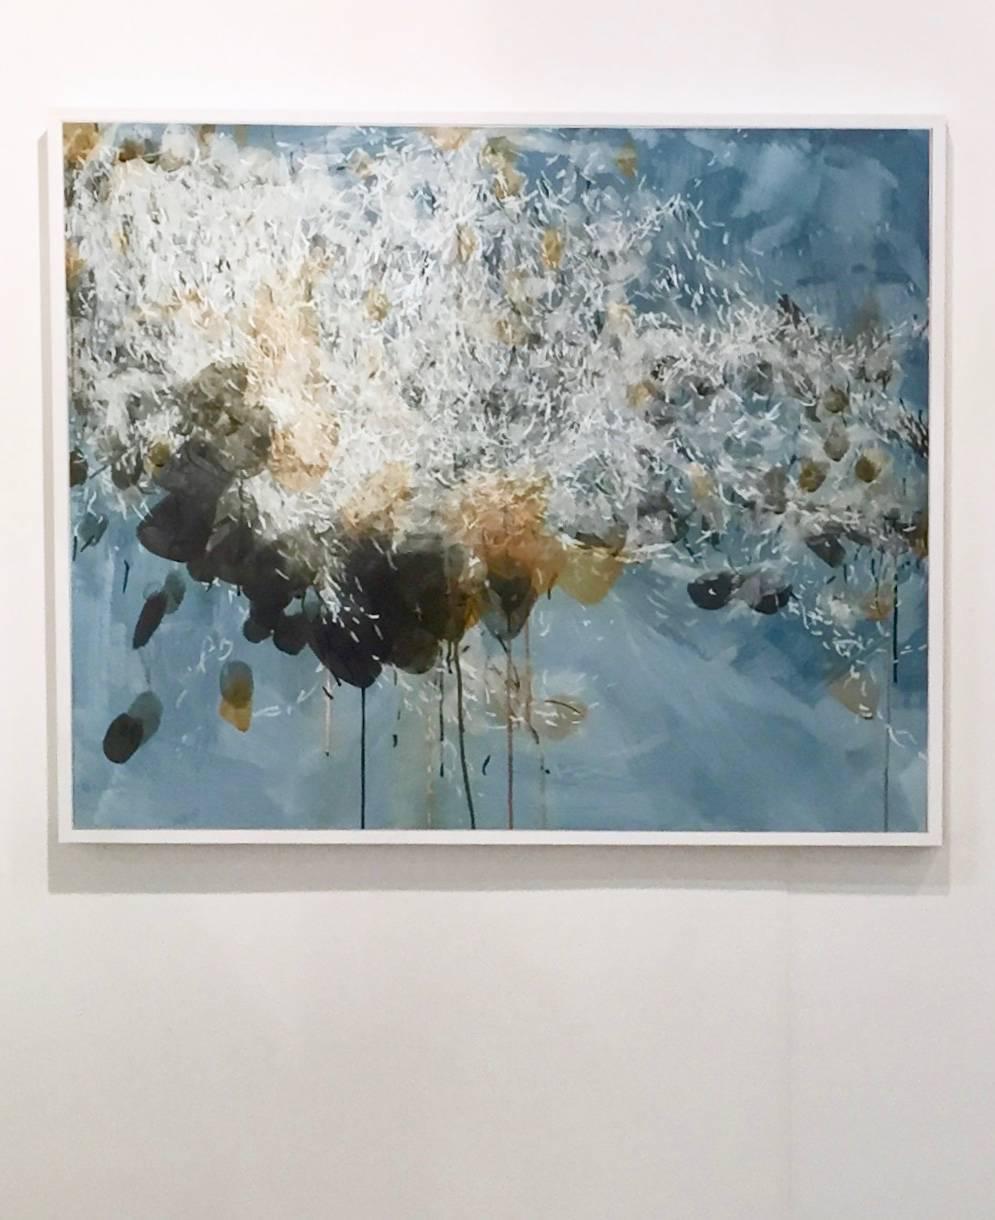 Swarm - Woodland Brown (Gran Sasso), 2017, Watercolour, ink and gesso on paper on aluminium, 33 1/2 × 40 3/5 in; 85 × 103 cm by Sara Dudman RWA

This painting has been mounted onto aluminium and set in a wood tray frame.

Painterly qualities and